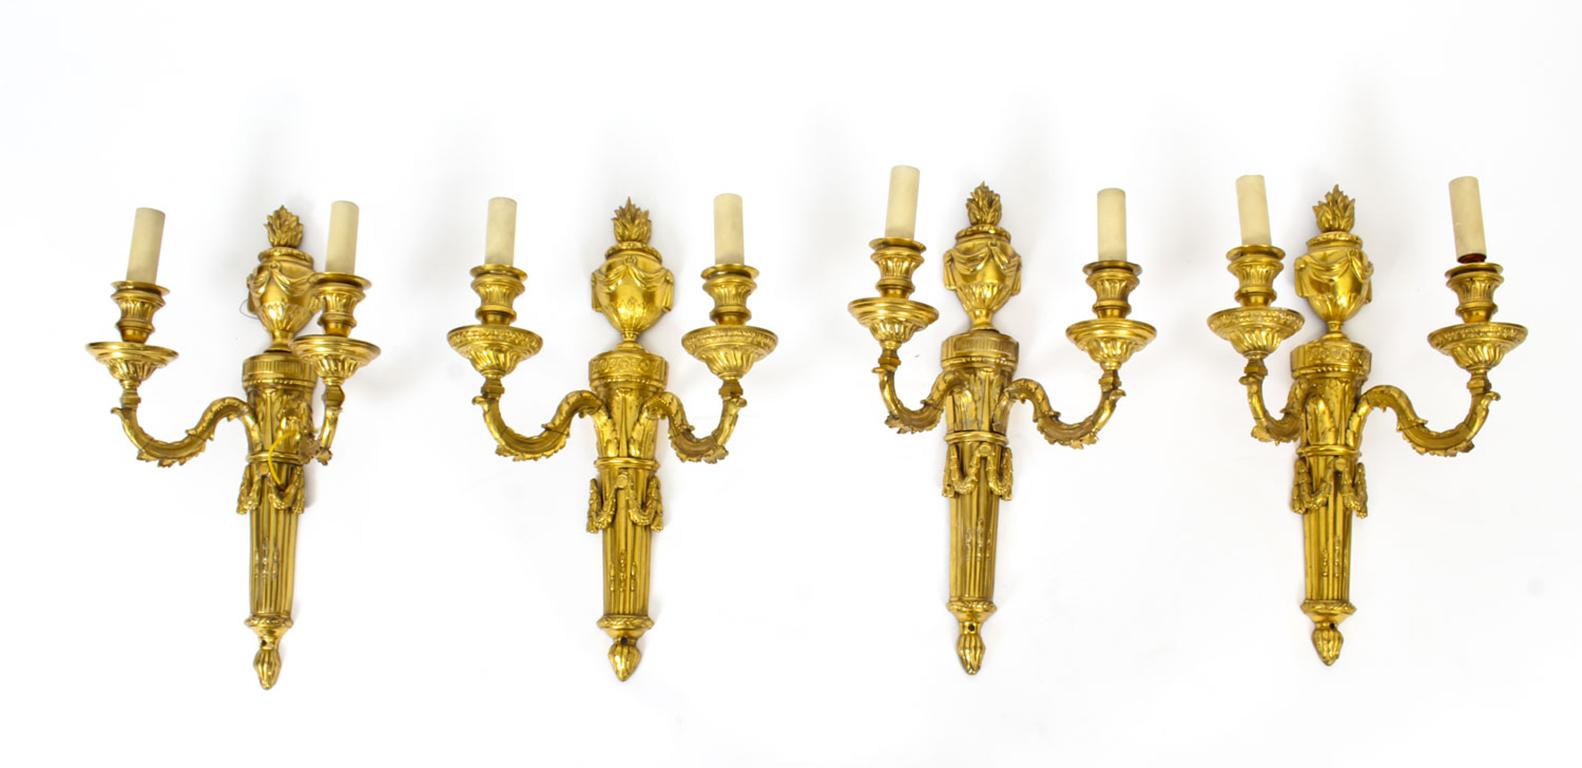 This is a beautiful set of four good sized Adam Revival ormolu twin branch wall lights, dating from the mid-19th century.

The lights feature classical Regency elements with anthemion and classical flaming urn, with flame and scrolling drapery cast